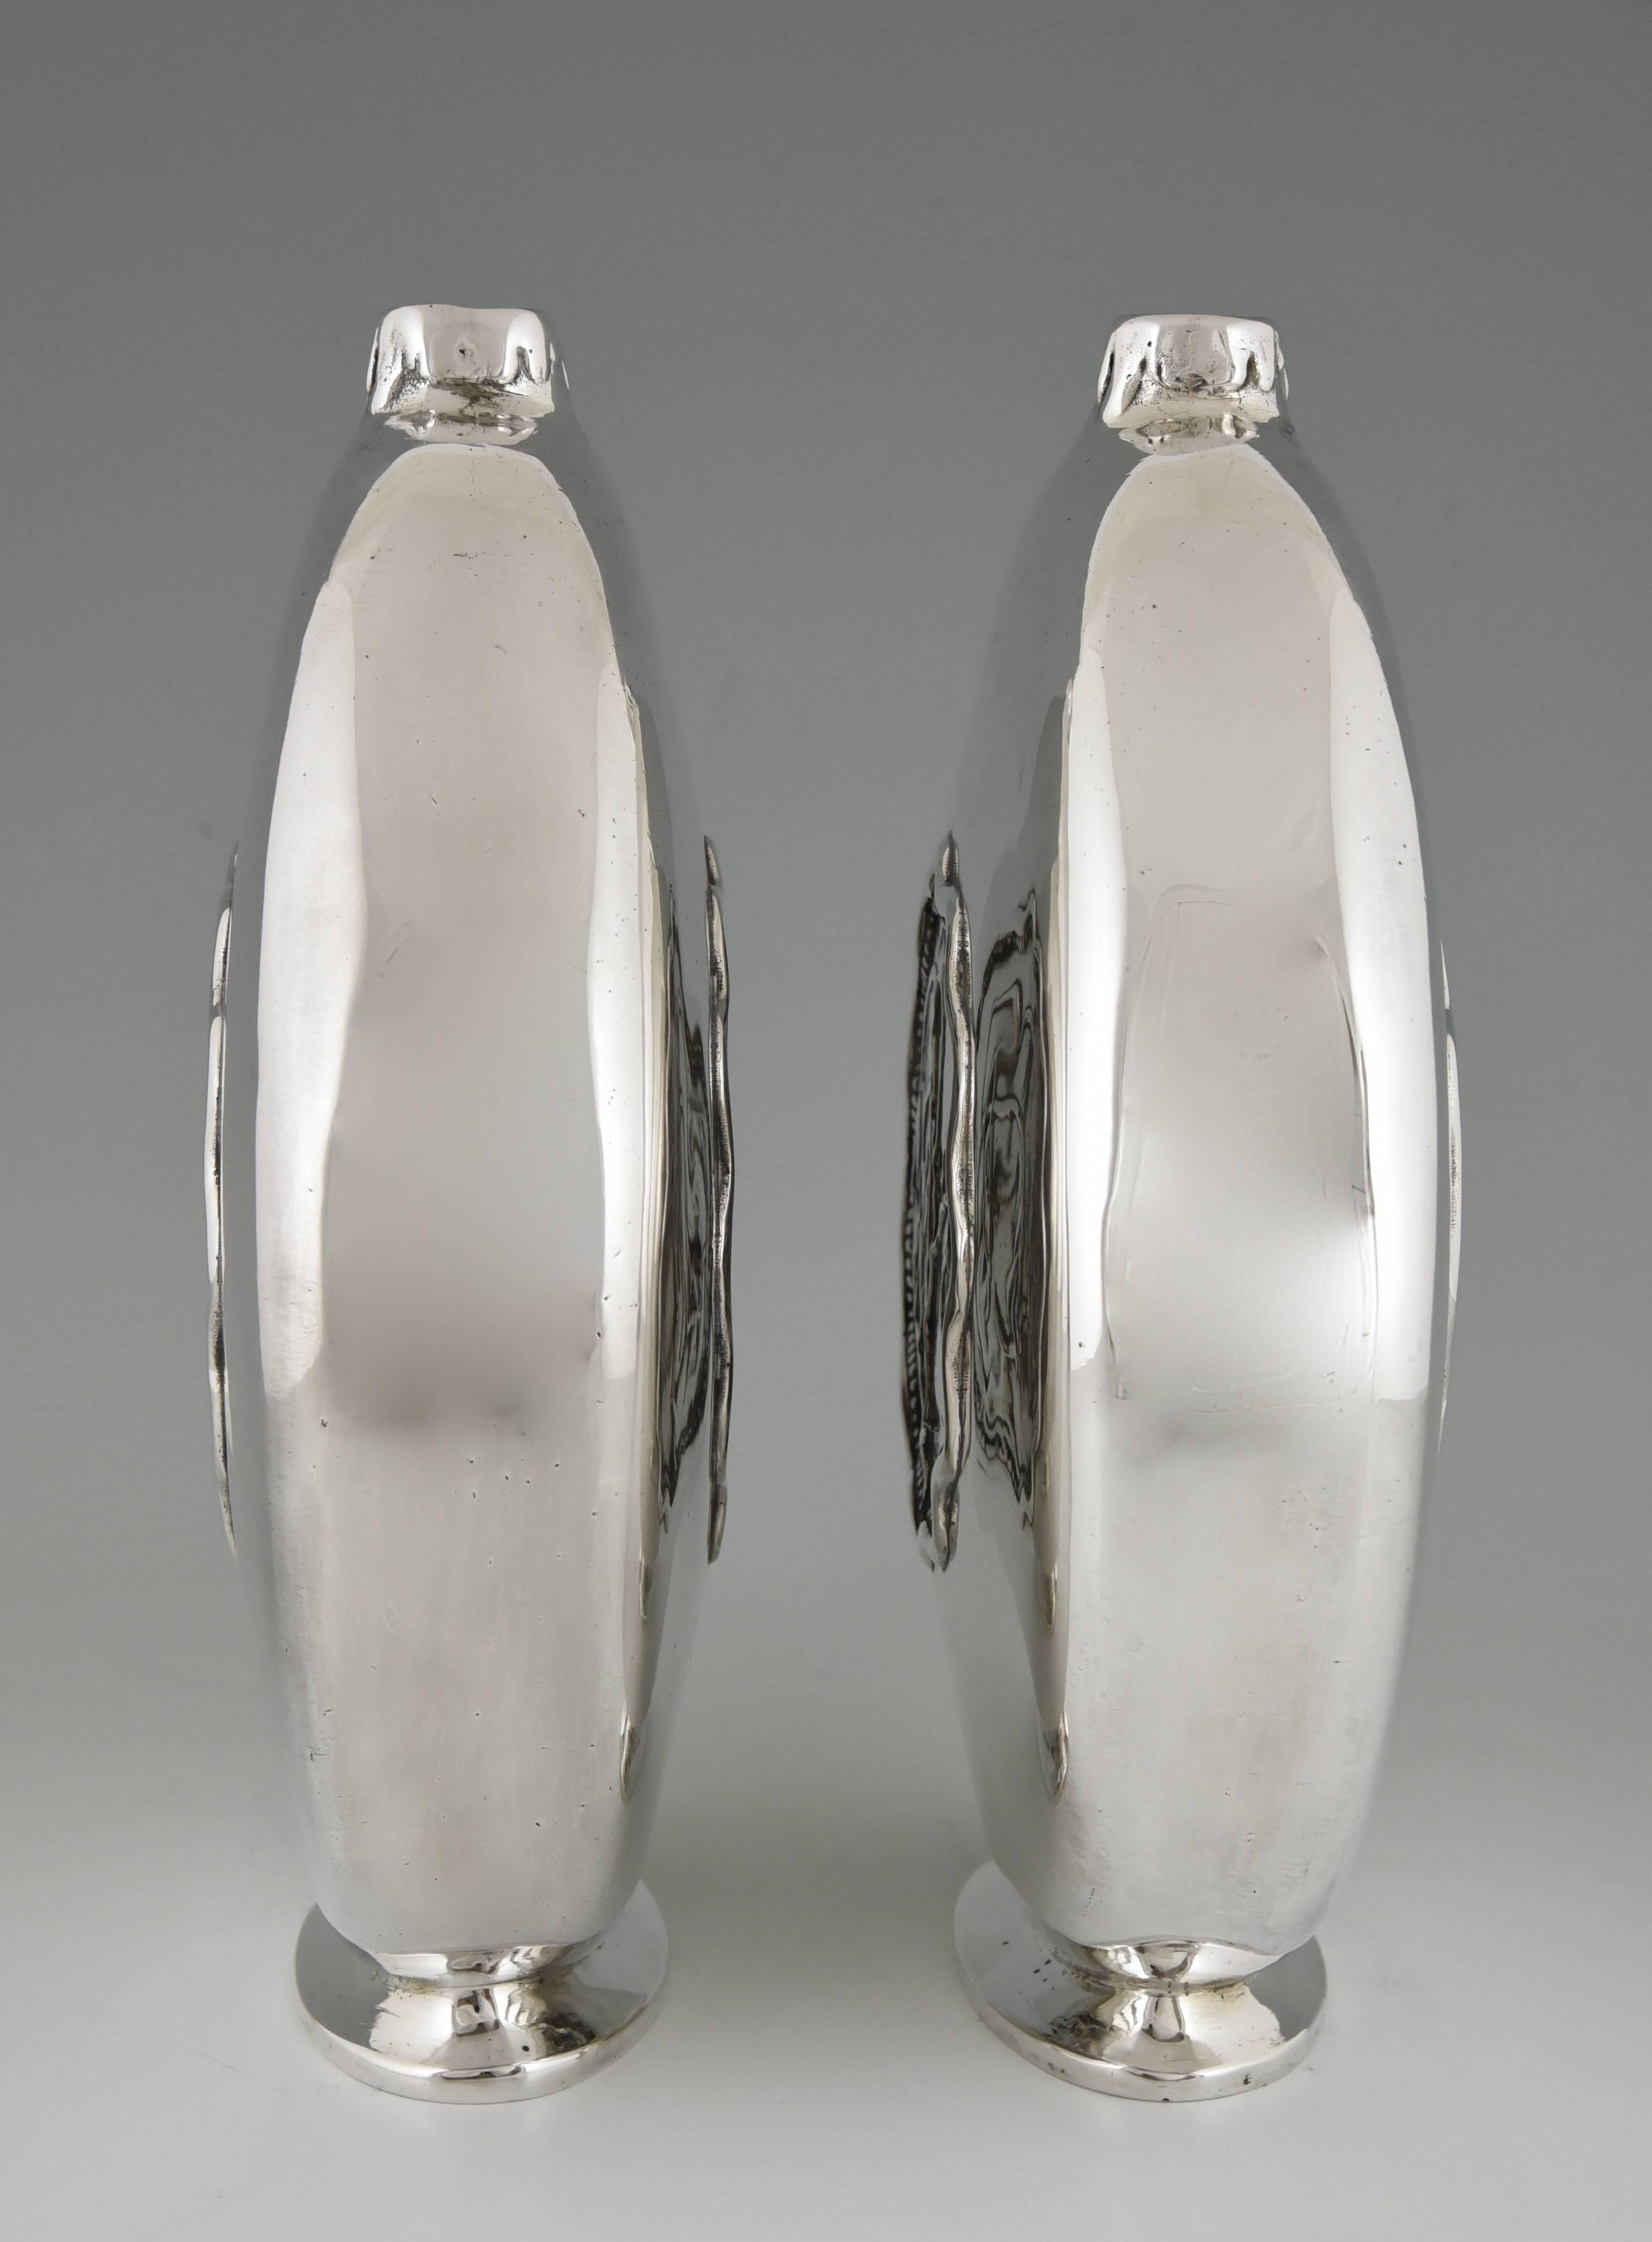 French Pair of Silvered Bronze Art Deco Vases by G. Poitvin 1930 1